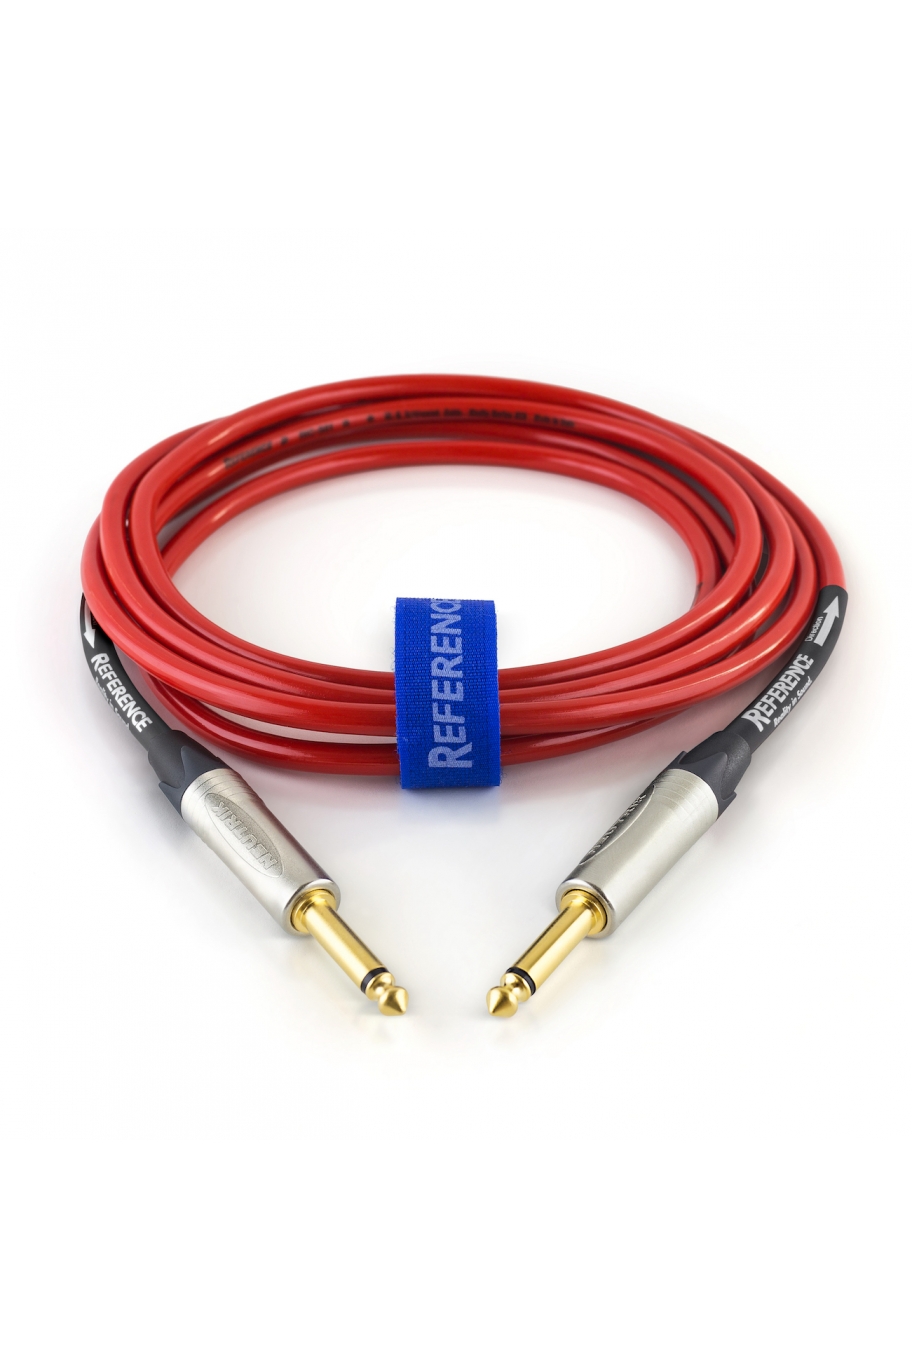 Reference Cables RIC01BASS-RED ストレート?ストレート 4.5m-